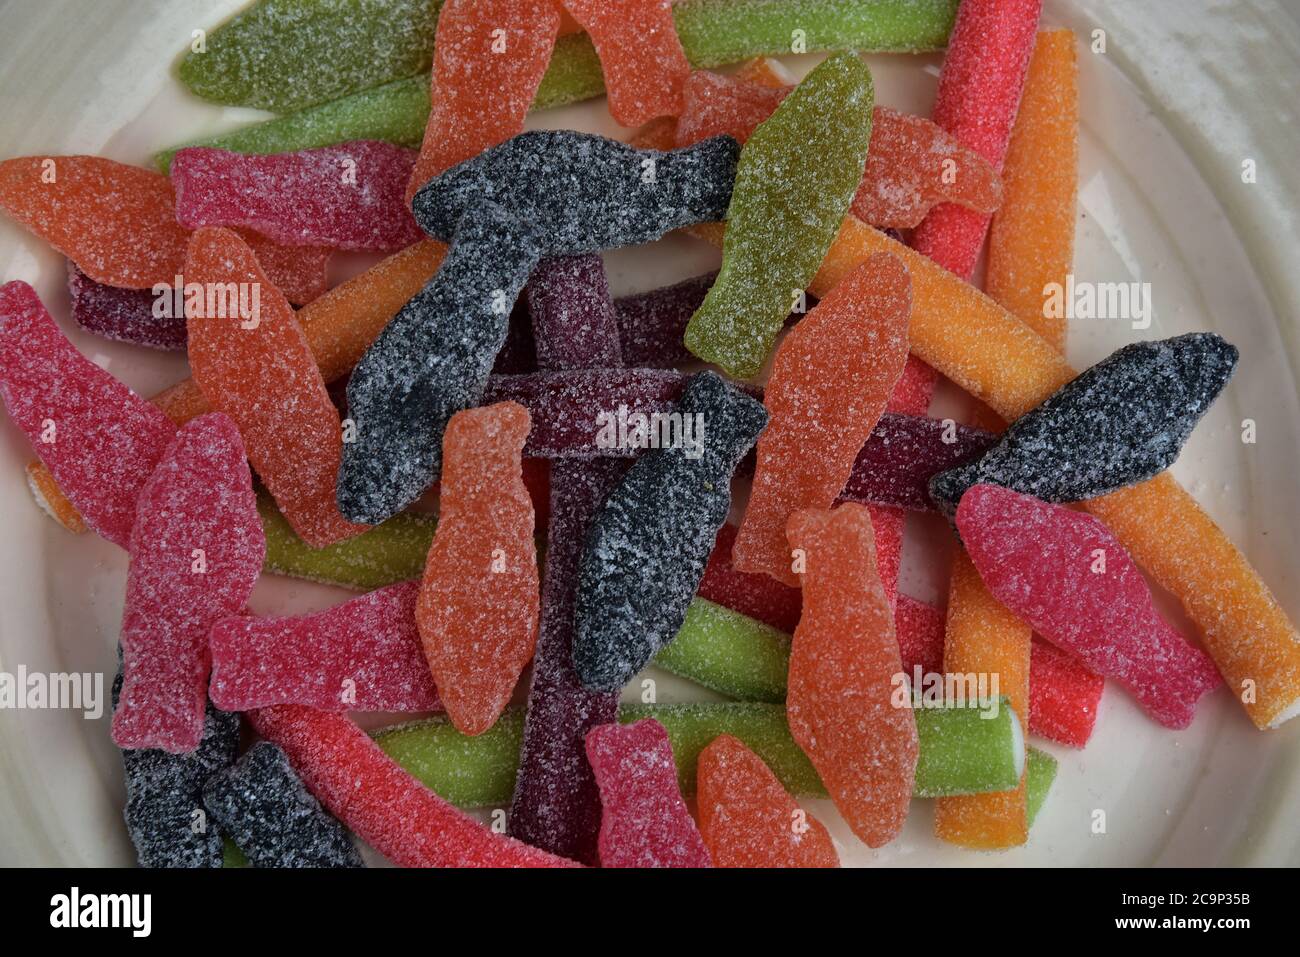 Sweets containing a high sugar content Stock Photo